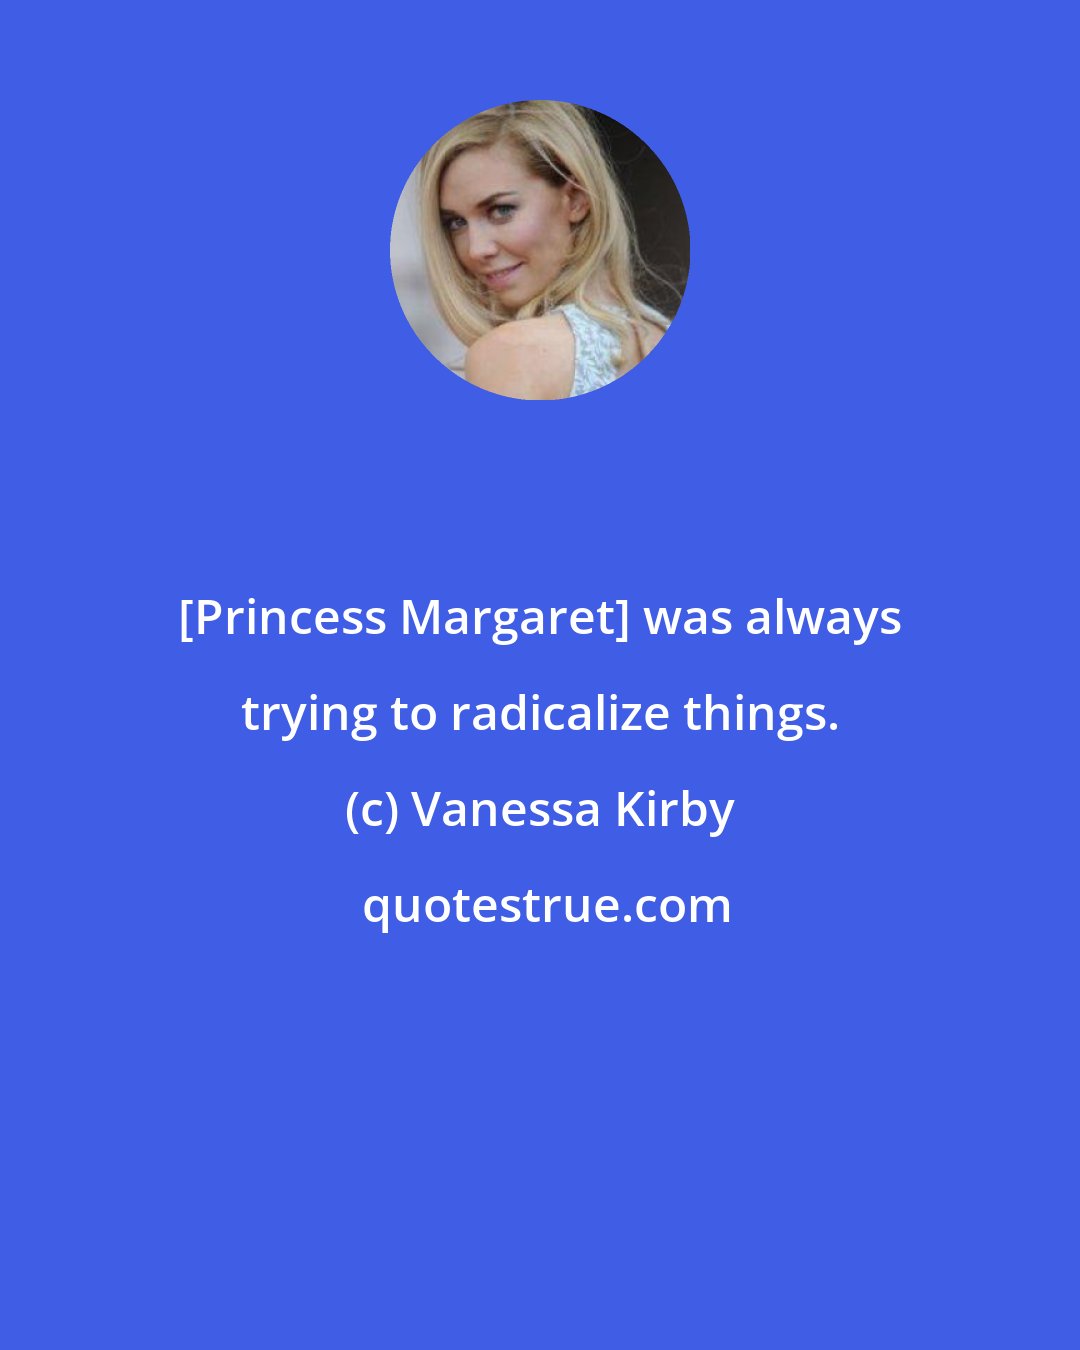 Vanessa Kirby: [Princess Margaret] was always trying to radicalize things.